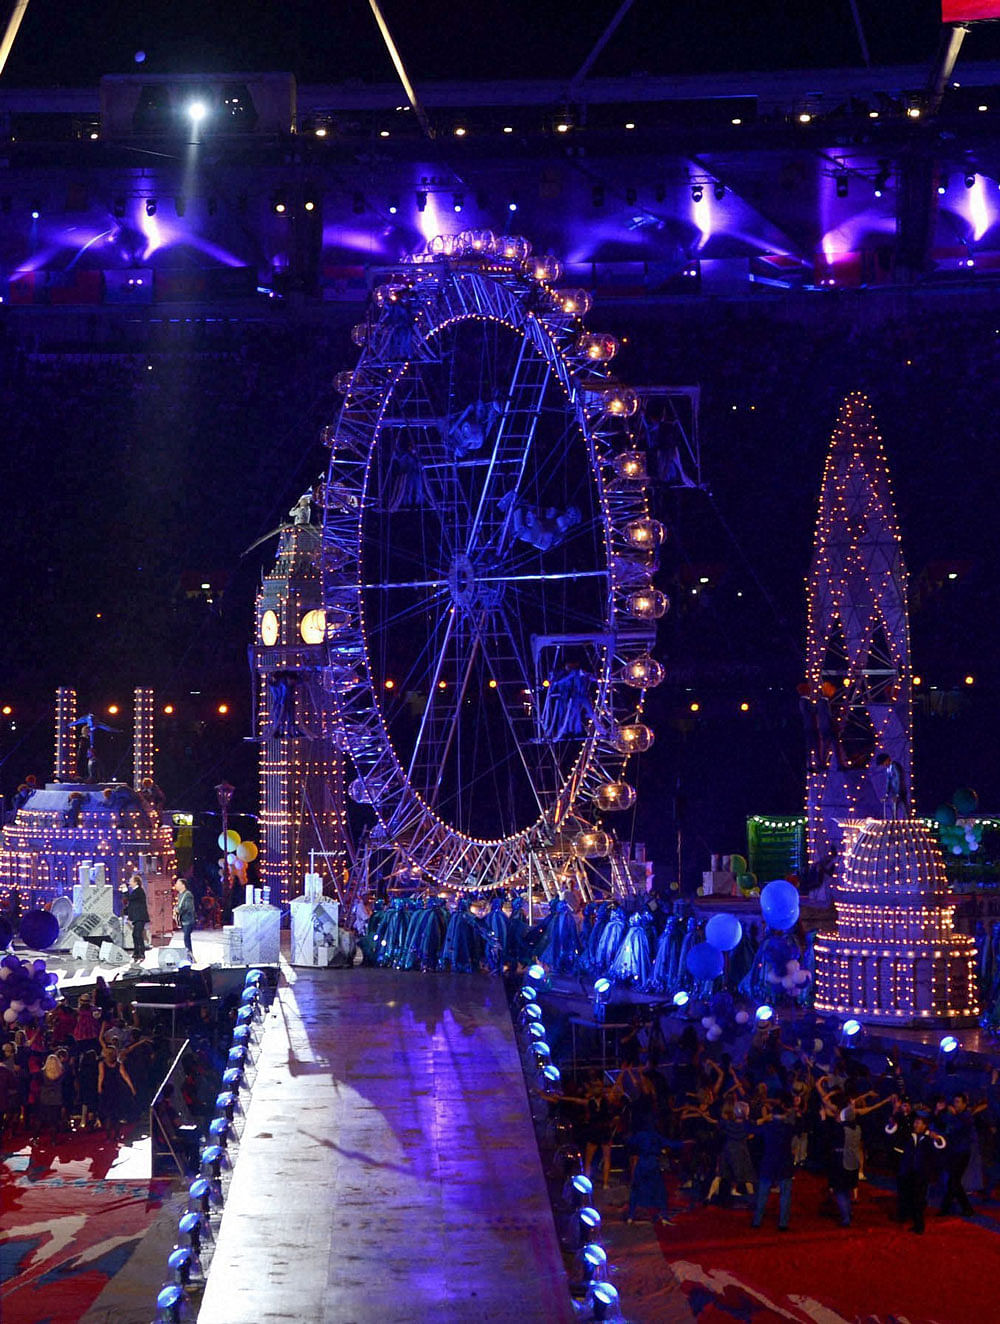 Artisits perform during the Closing Ceremony at the 2012 Summer Olympics on Sunday. PTI Photo